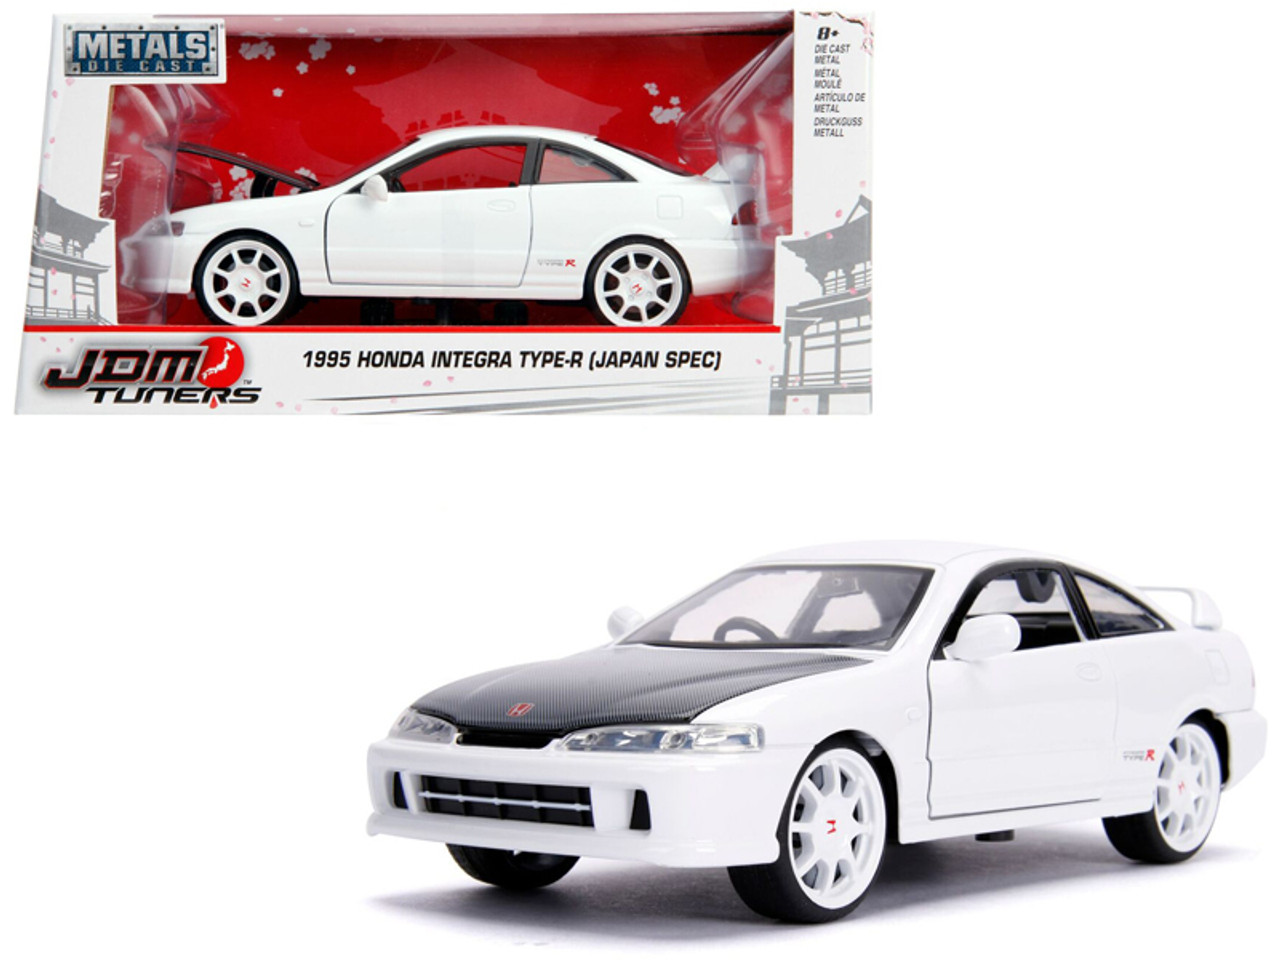 1/24 Jada 1995 Honda Integra Type-R "Japan Spec" RHD (Right Hand Drive) Glossy White with Carbon Hood and White Wheels "JDM Tuners" Diecast Car Model